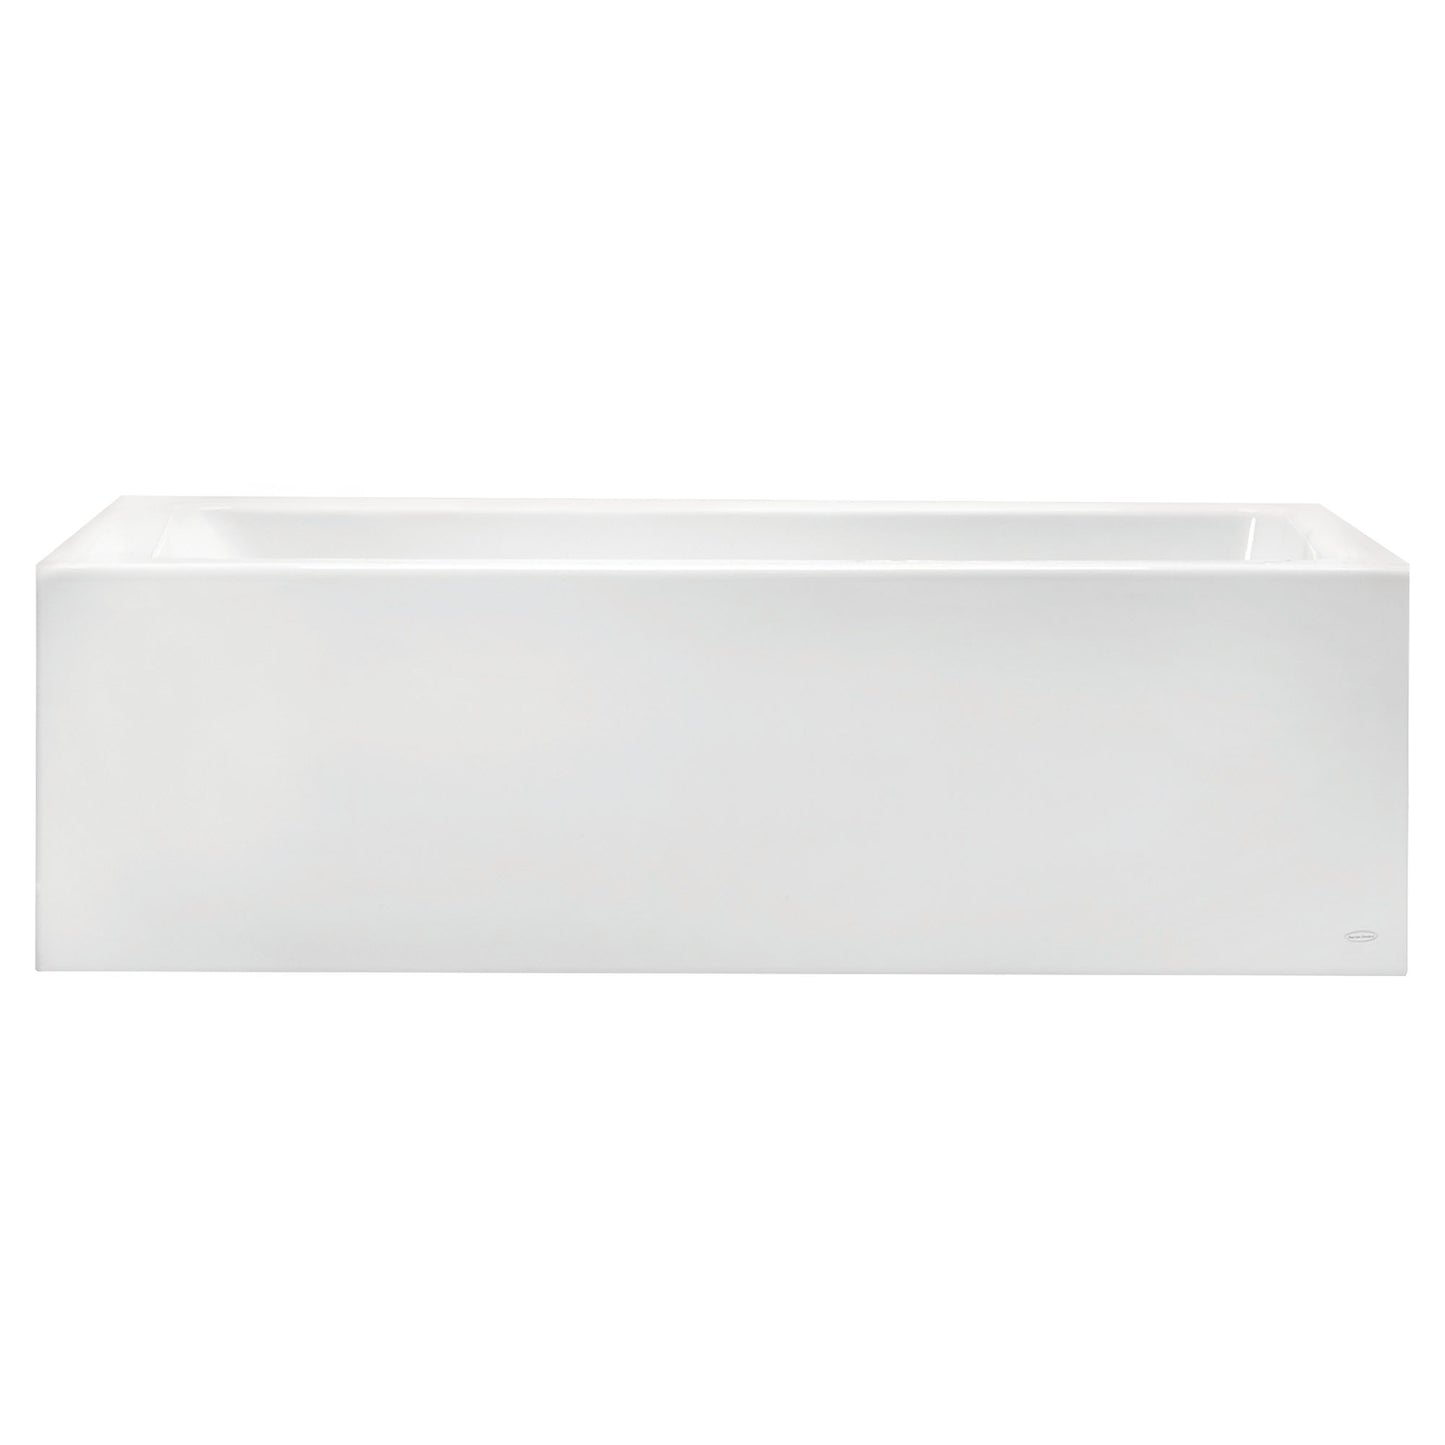 AMERICAN-STANDARD 2573102.020, Studio 60 x 30-Inch Integral Apron Bathtub Above Floor Rough with Right-Hand Outlet in White